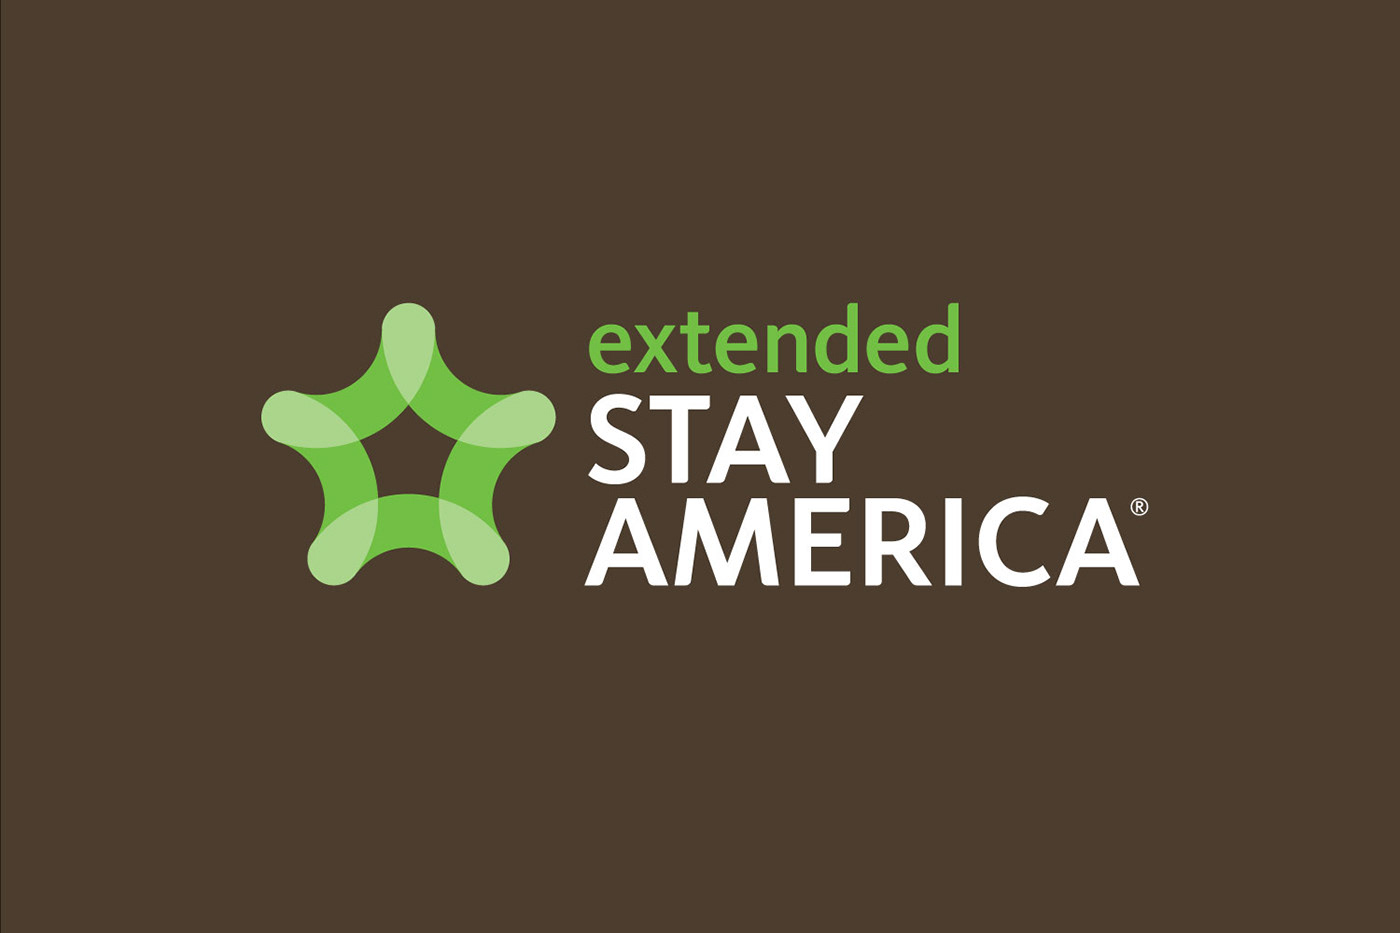 identity logo visual system Signage print Vehicle hotel Extended Stay America